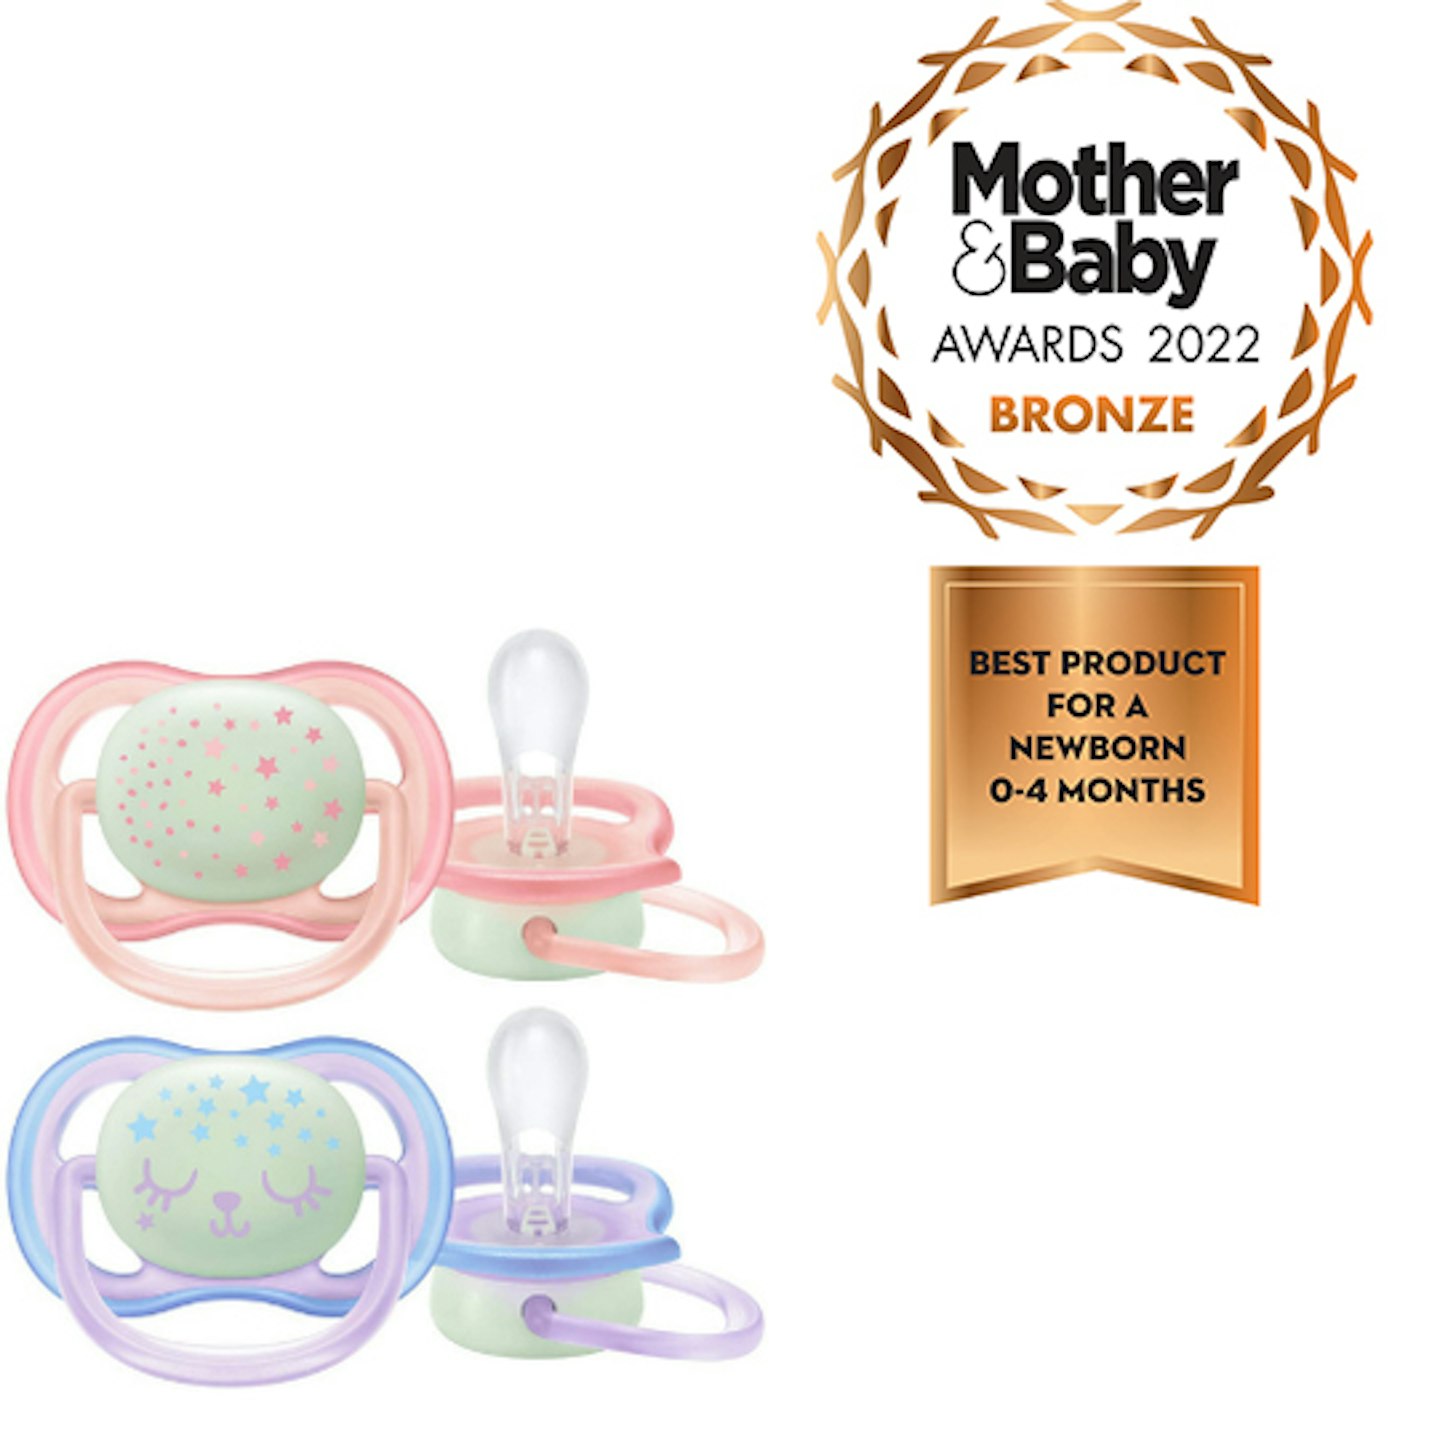 philips avent night soothers bronze product card